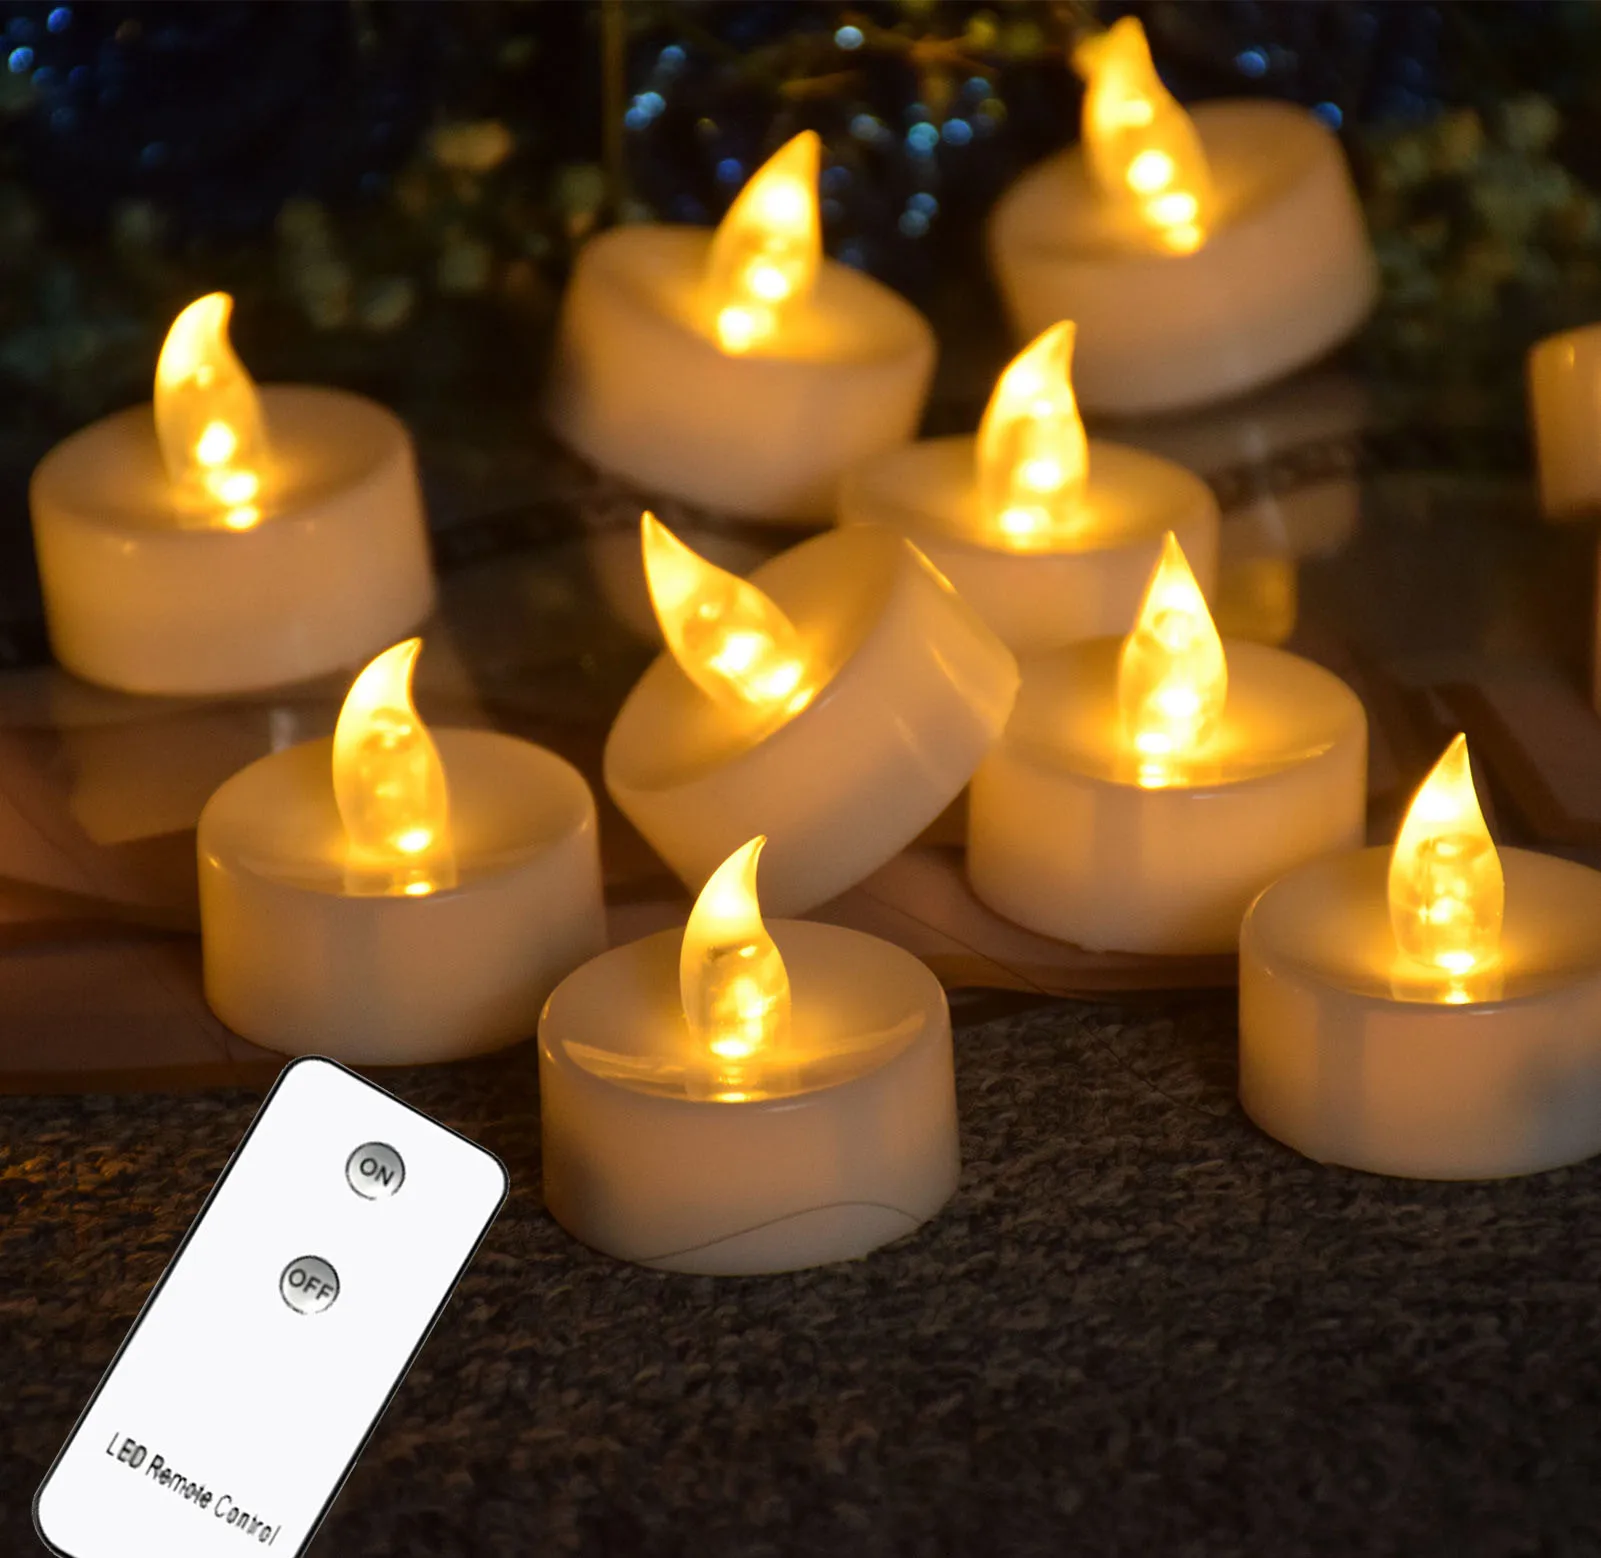 

12X Electric Frosted Candle Warm White LED Tea Light Remote Control Table Desk Night Lamp Wedding Event Party Lighting Decors